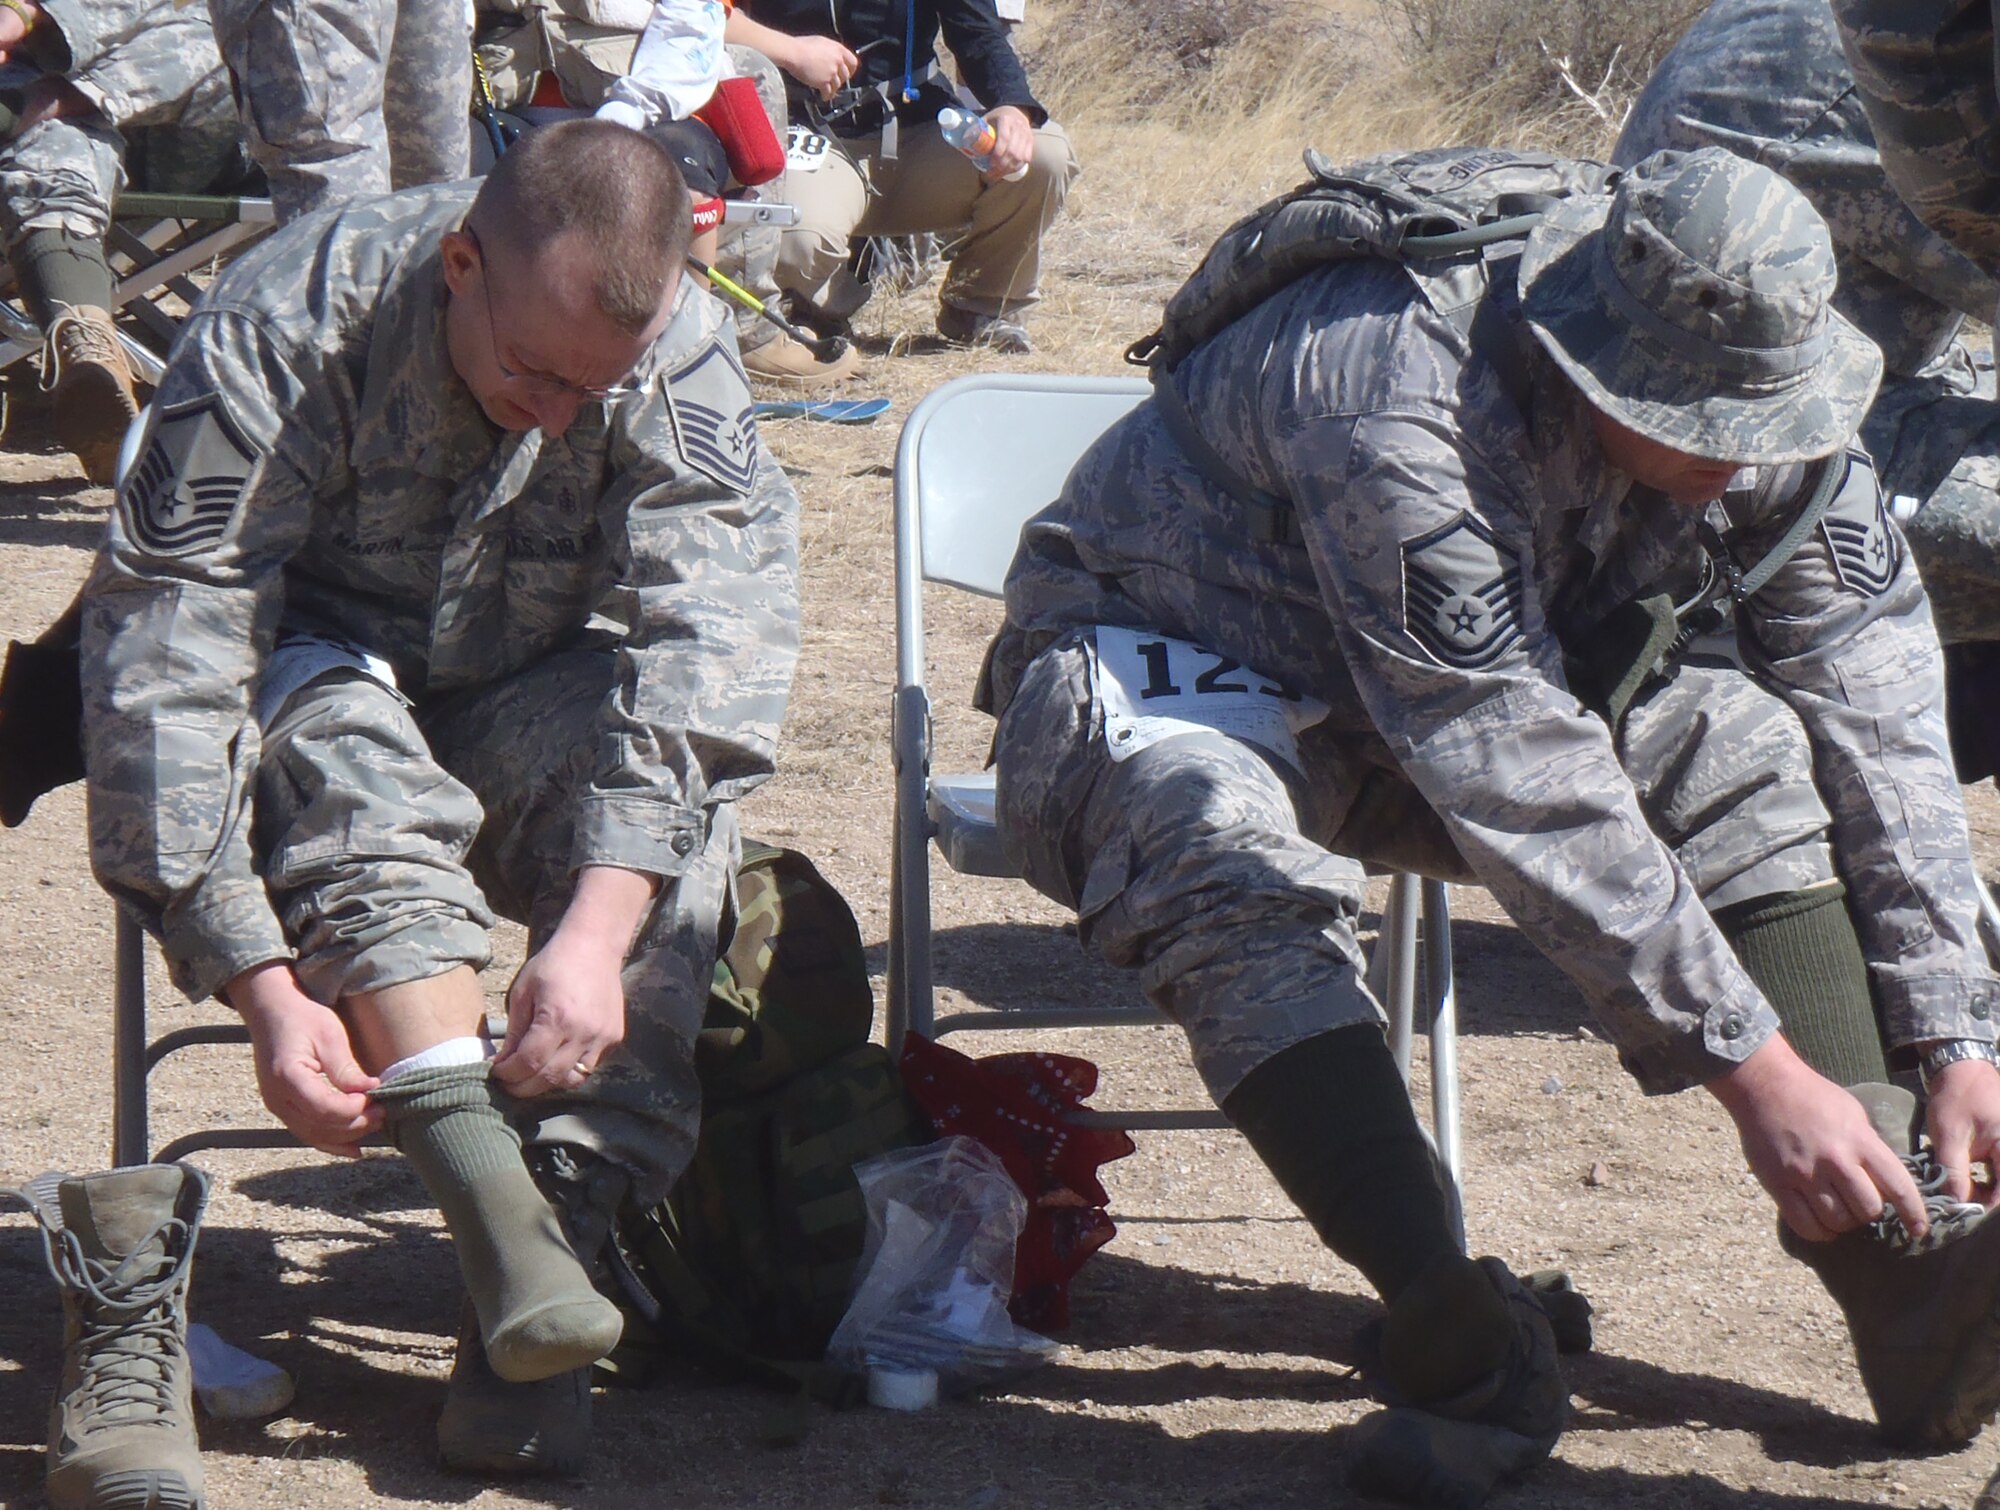 Master Sergeants Terry Martin (left) and Jeff Norling (right) change socks during the 26.2 mile Bataan Memorial Death March. (photo by Lt. Col. Bill Hefner)